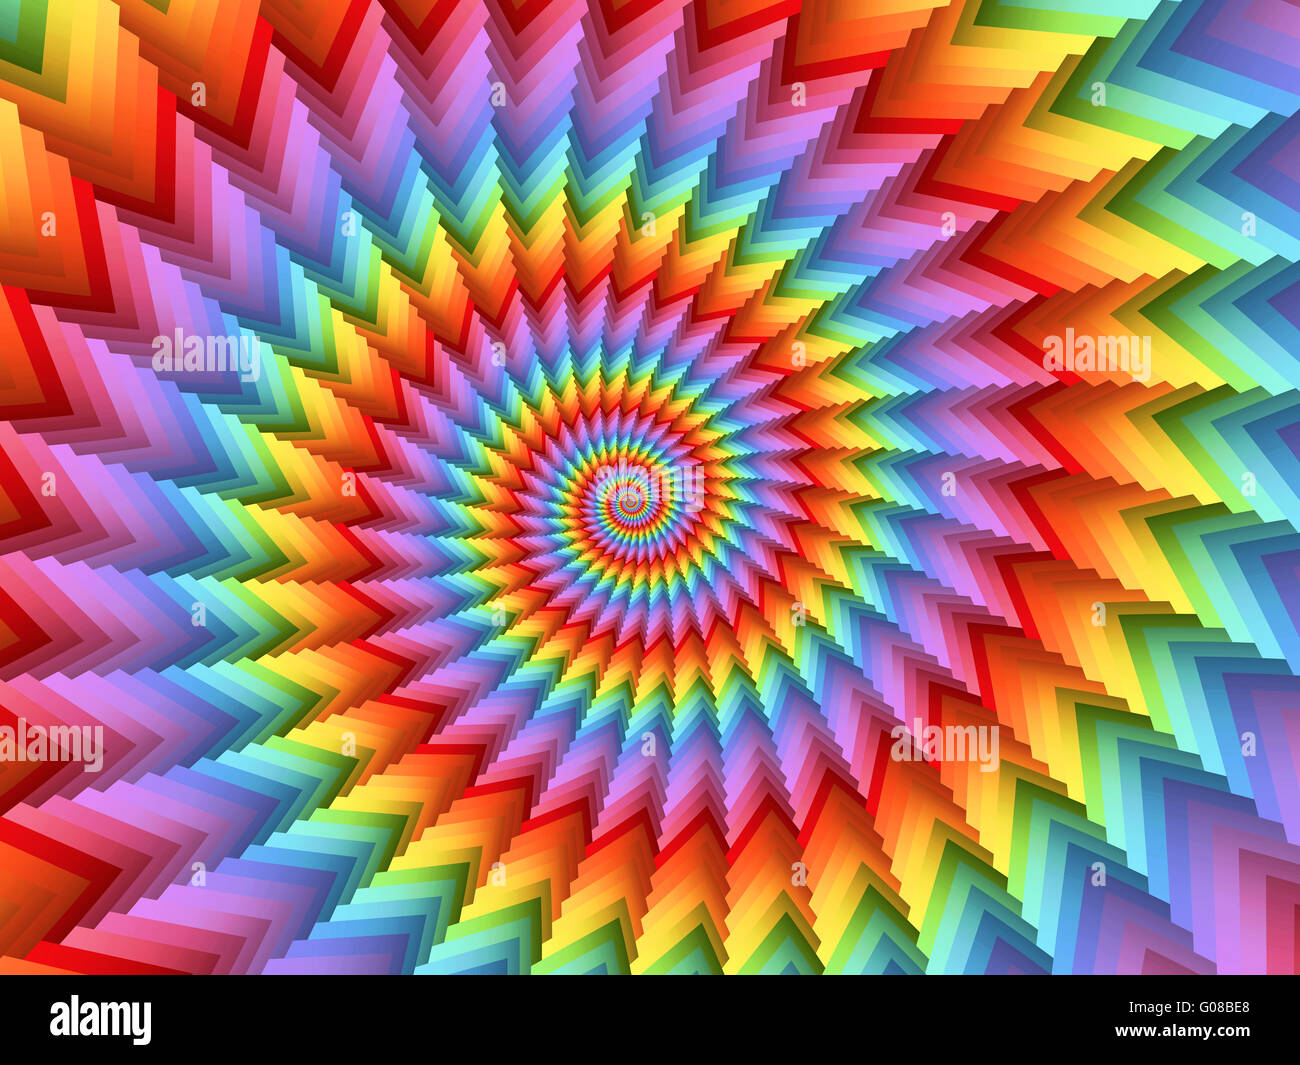 Beautiful Rainbow Psychedelic Spiral Fractal Background Stock Photo